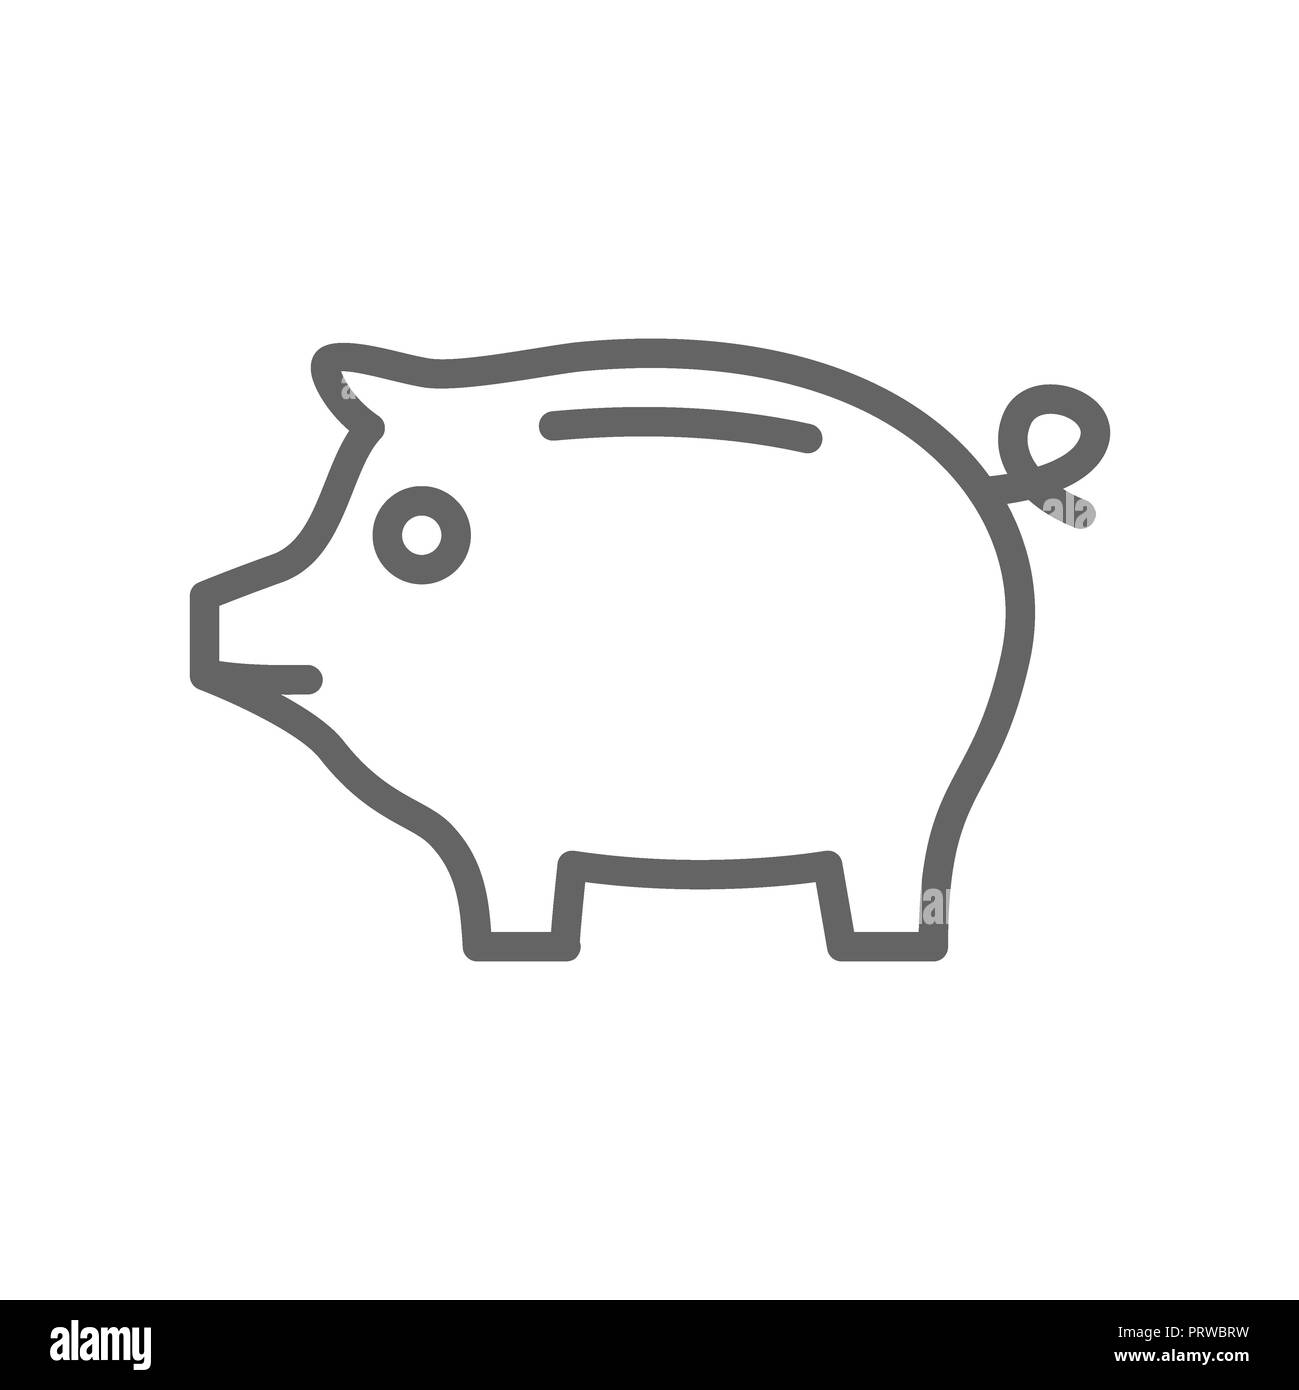 Simple piggy bank line icon. Symbol and sign illustration design. Editable Stroke. Isolated on white background Stock Photo